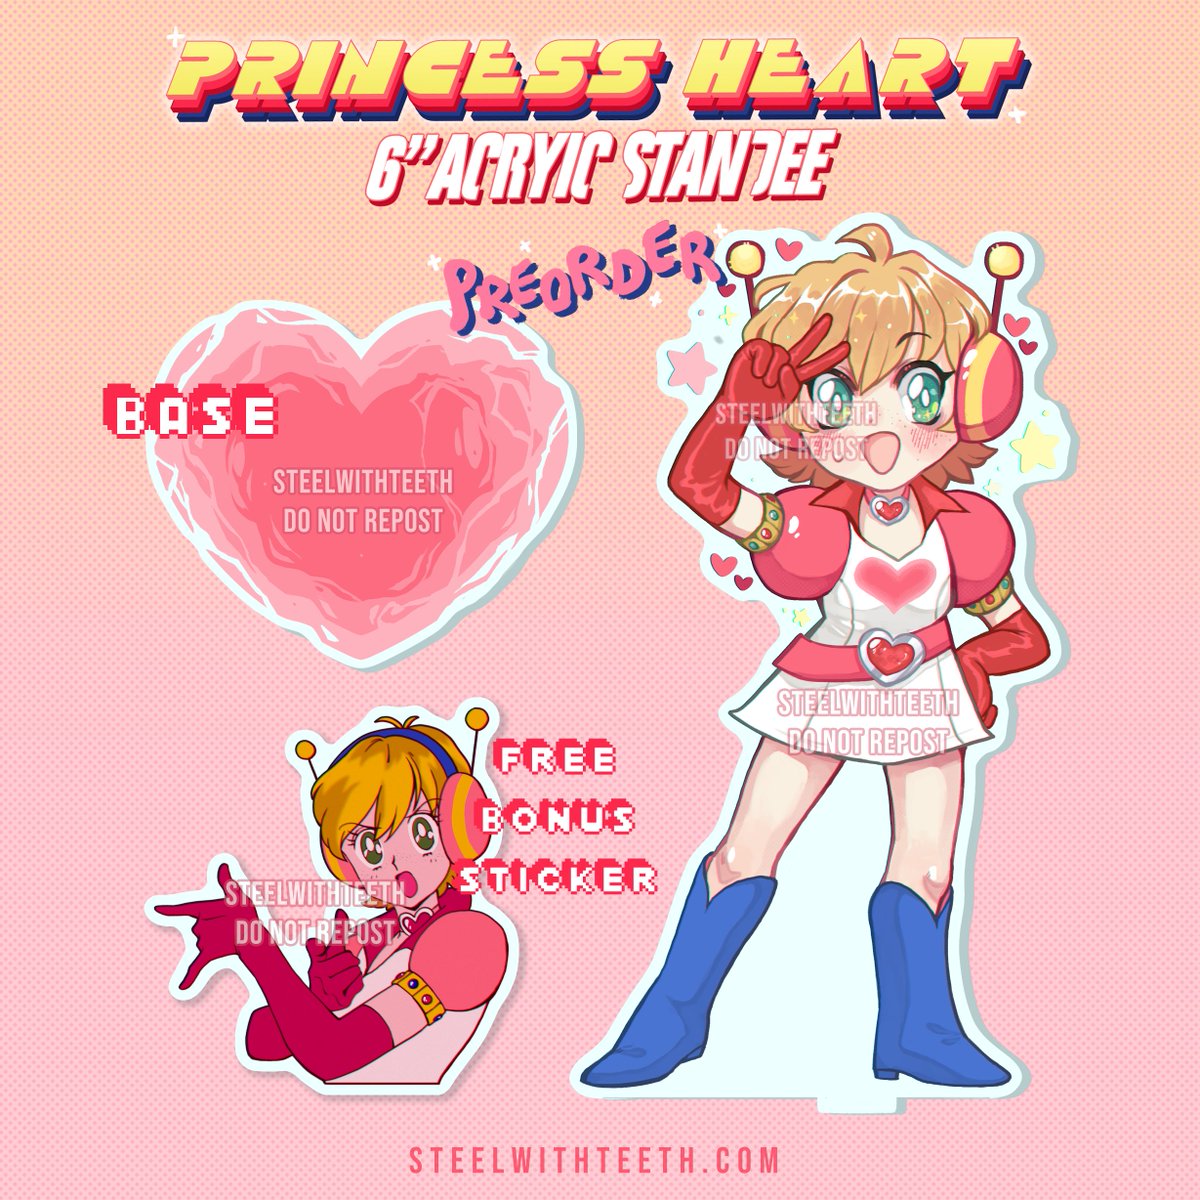 💗PRINCESS HEART ACRYLIC STANDEES💗
....are now available for preorder! ✨

More info is in the 🔗below! 